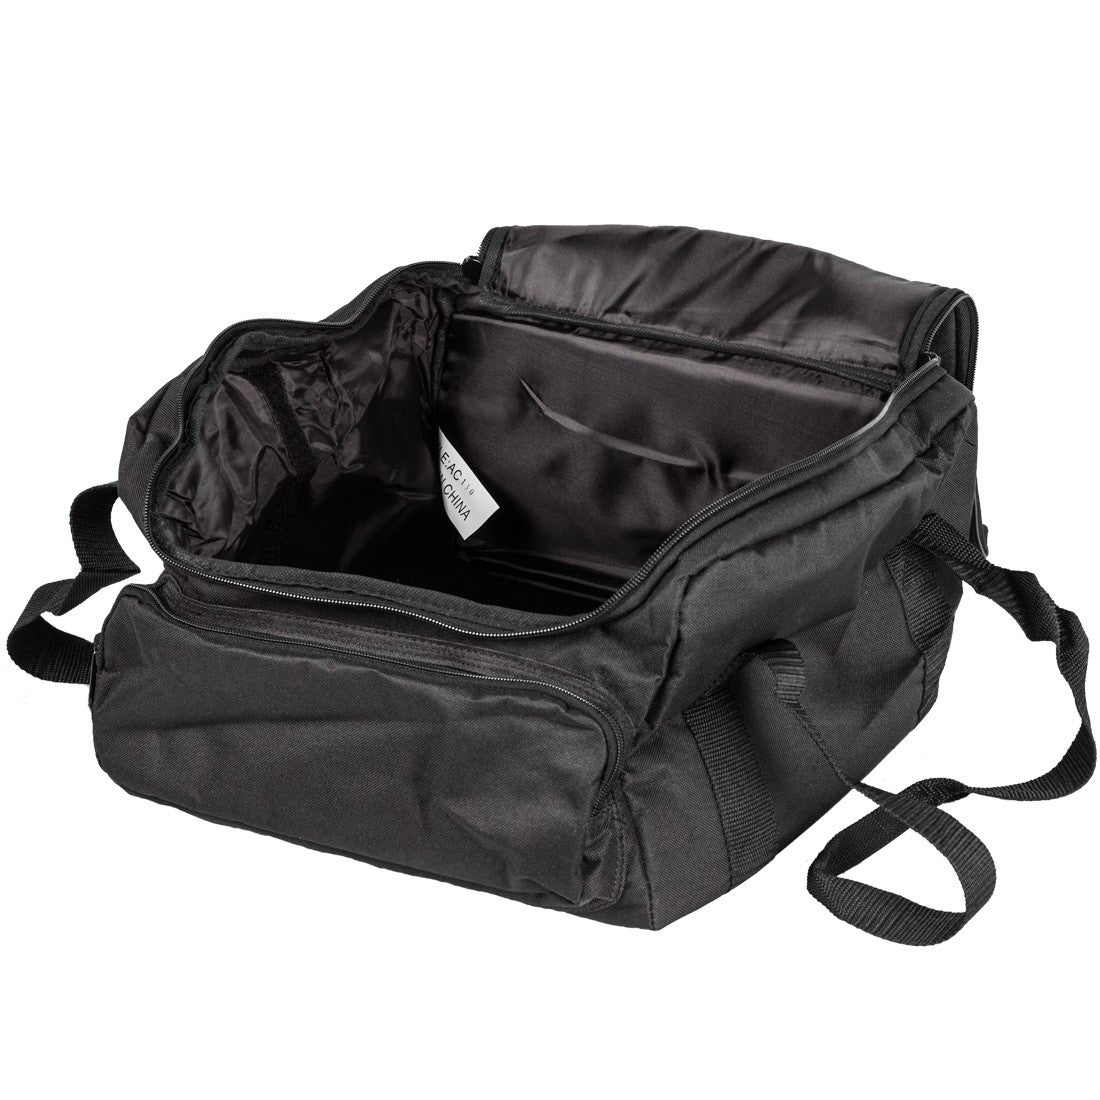 Accu-Case ASC-AC130 Padded Bag For Smaller Lights